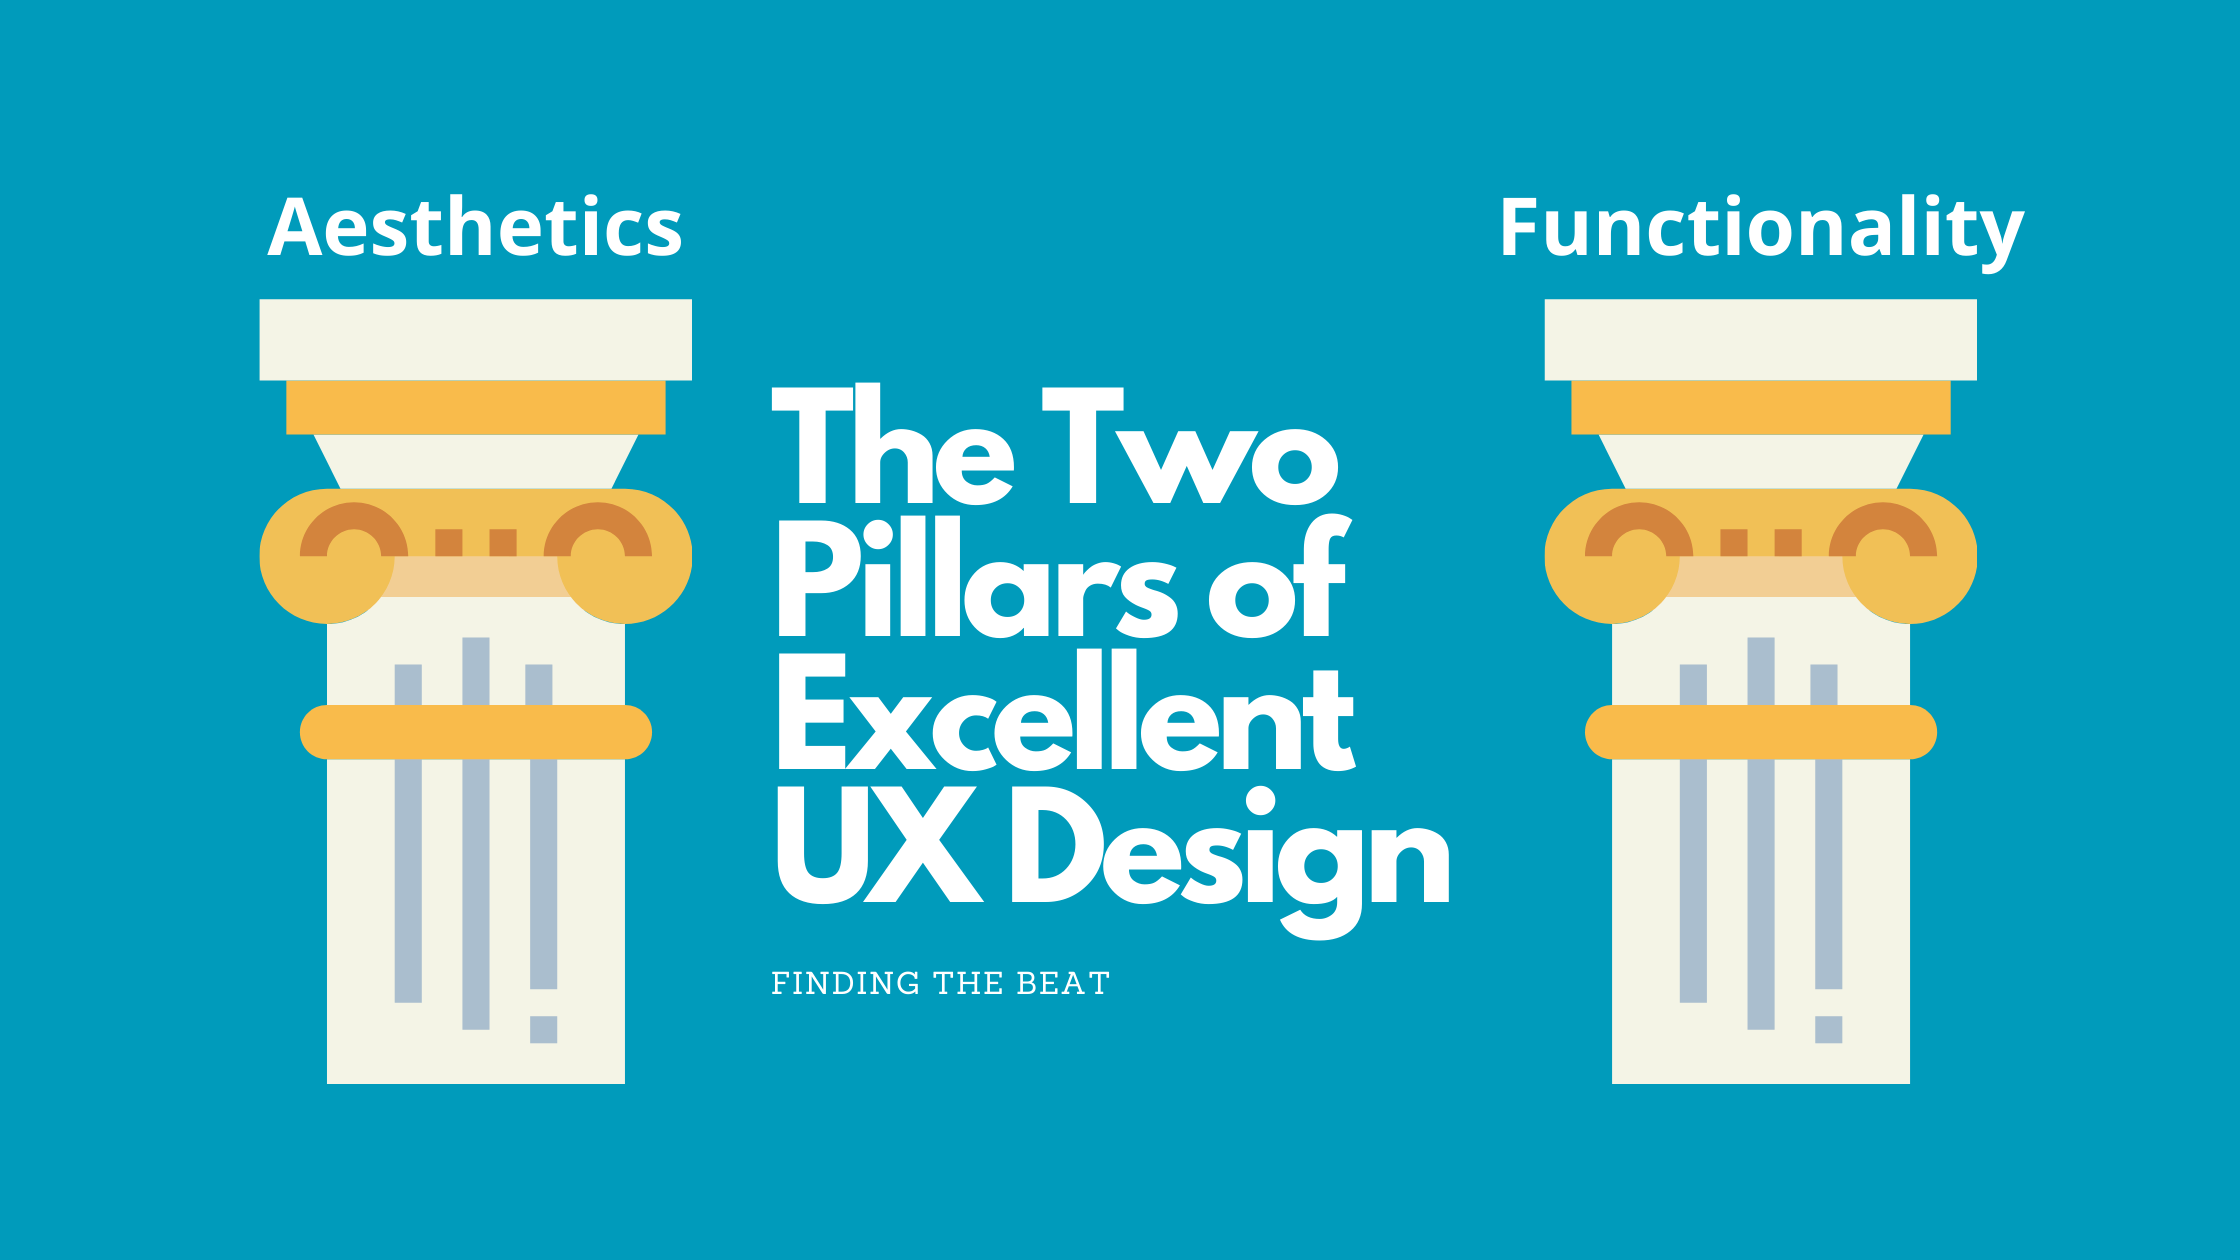 The Two Pillars of Excellent UX Design: Aesthetics & Functionality